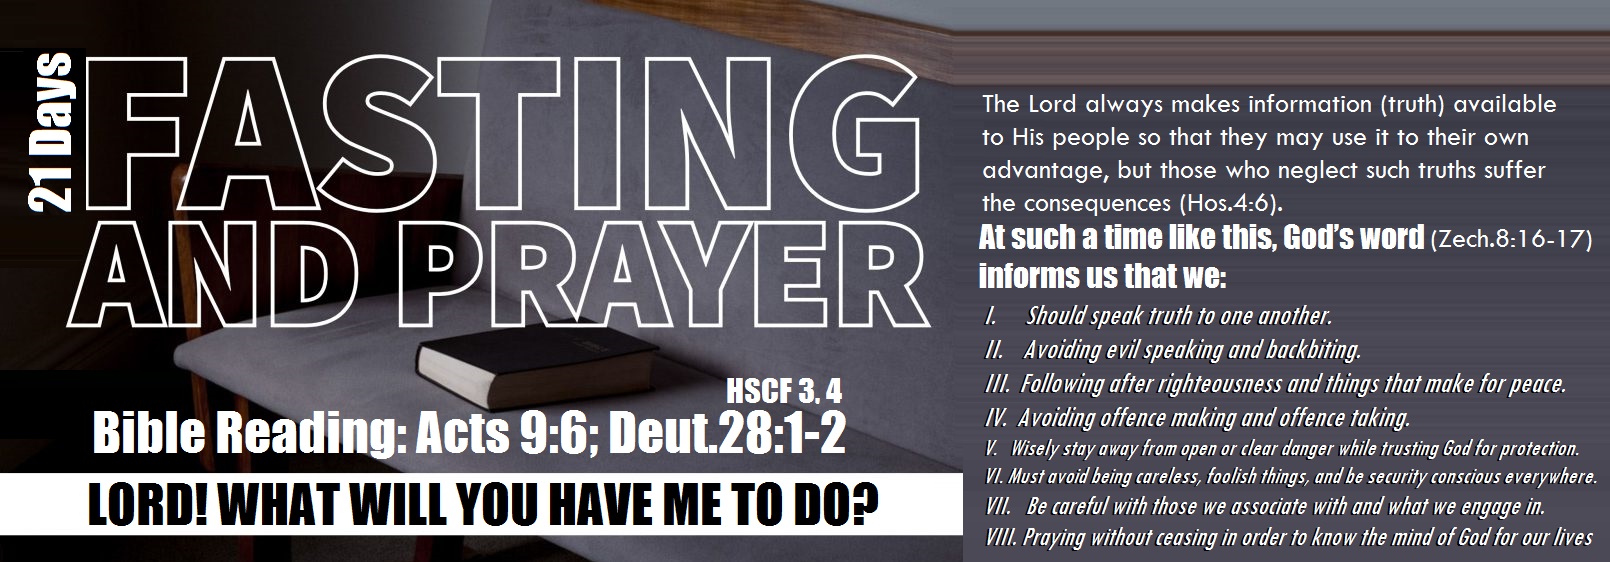 DAY 7 – LORD! WHAT WILL YOU HAVE ME TO DO?